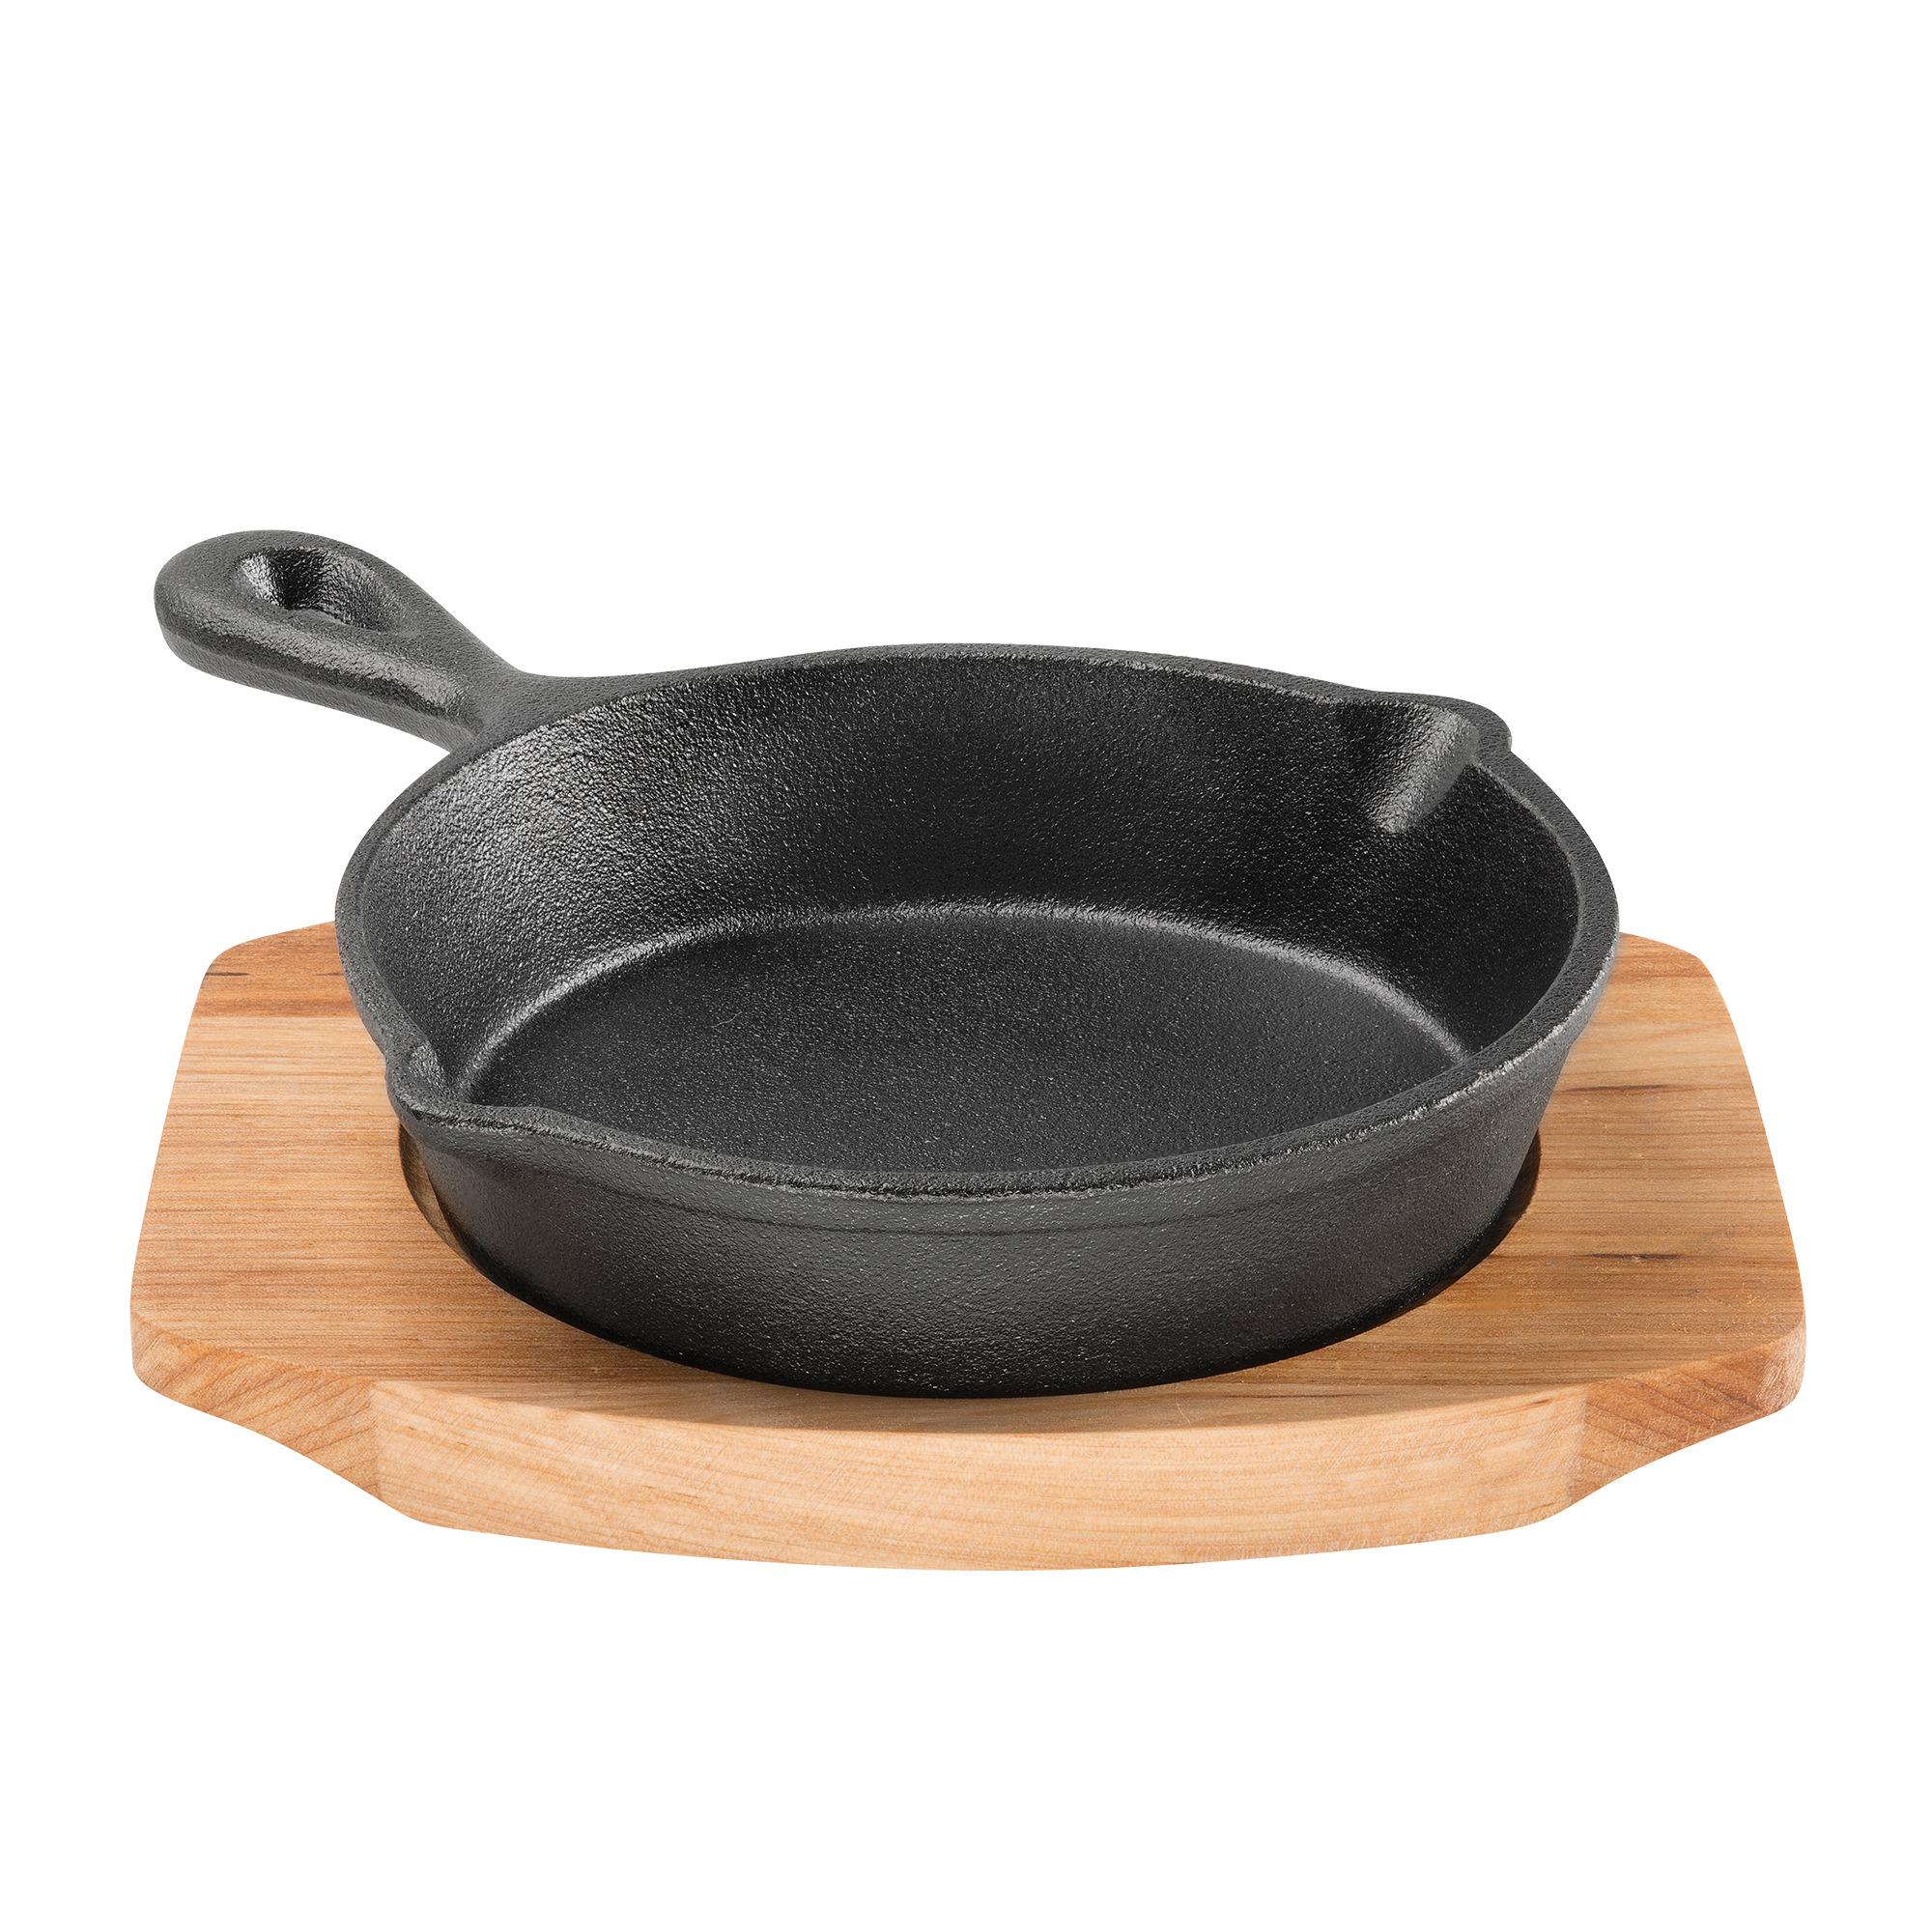 Pyrolux Pyrocast Cast Iron Skillet with Maple Tray 13.5cm Image 2